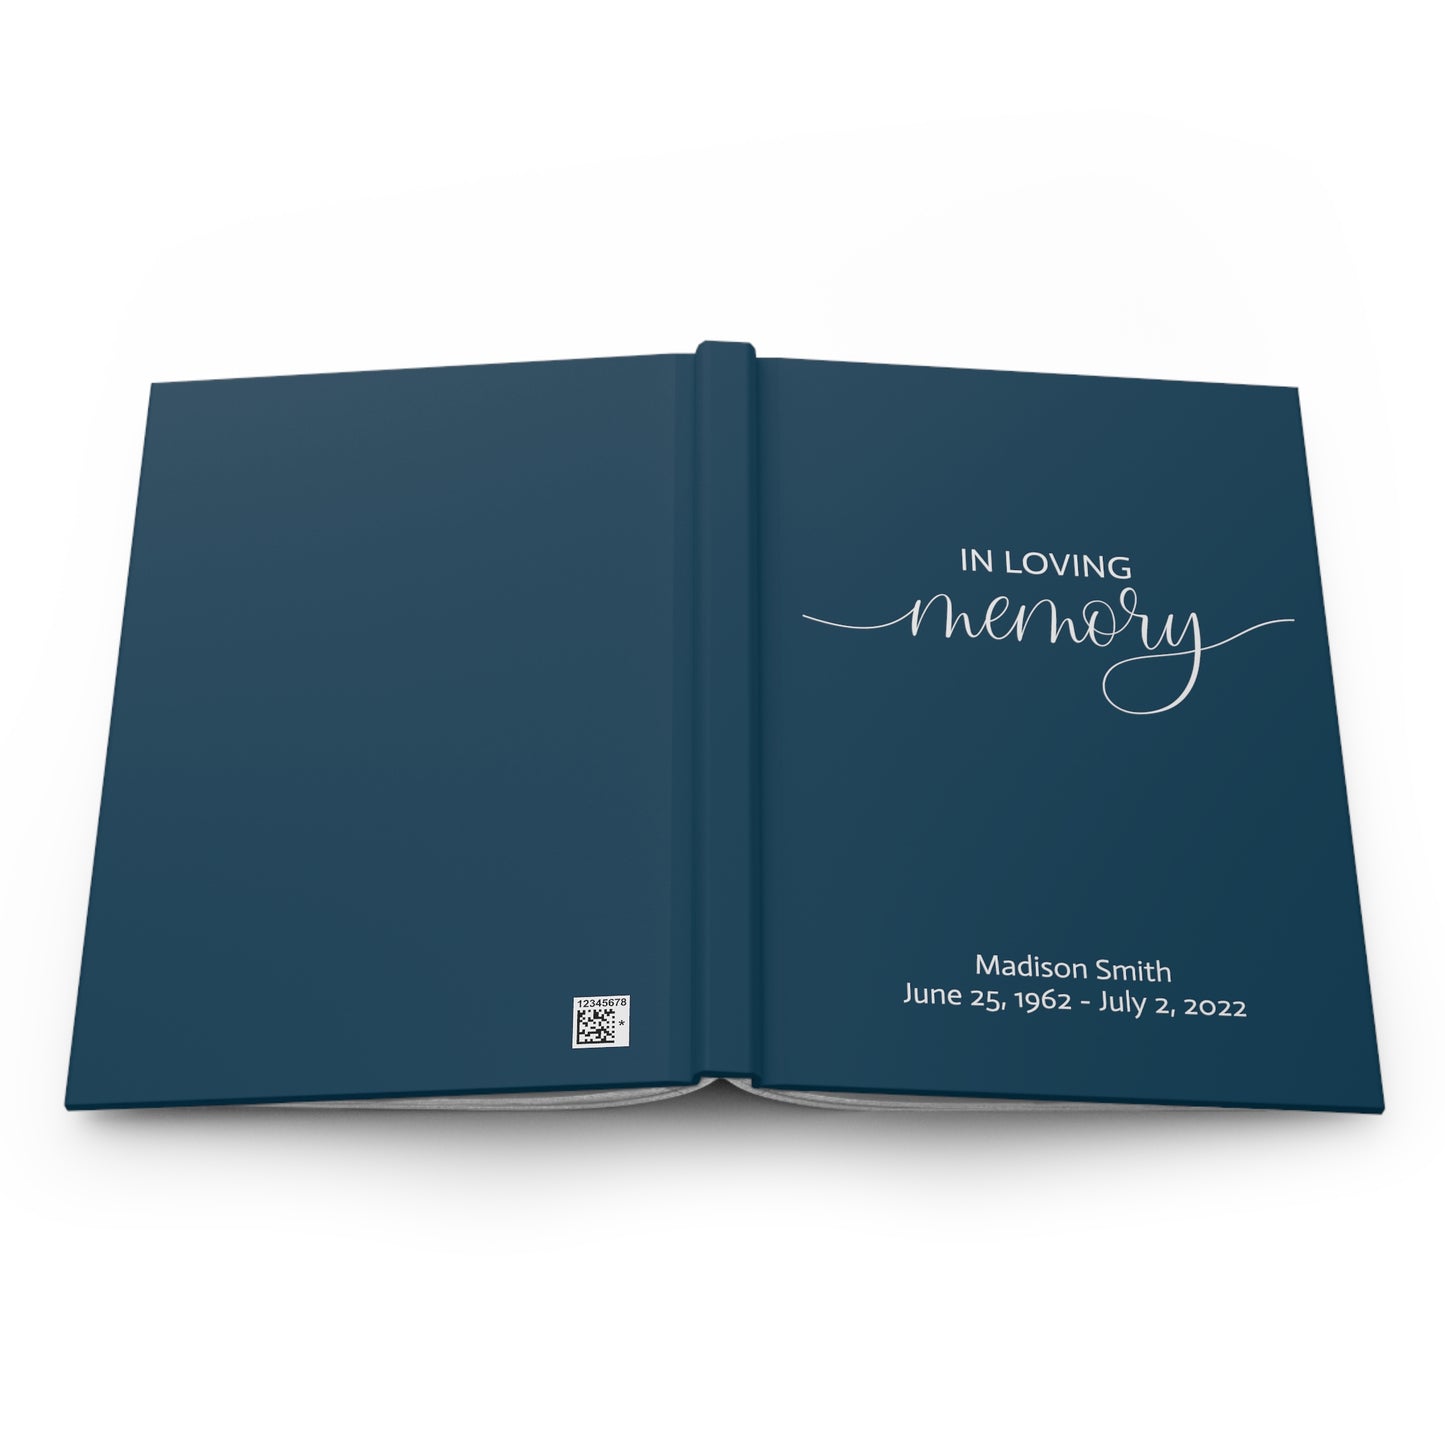 Funeral Guest Book, Memorial Book, Book to Sign, Sympathy Gift, Life Celebration, In Loving Memory, Funeral Registry, Memorial Guest Book